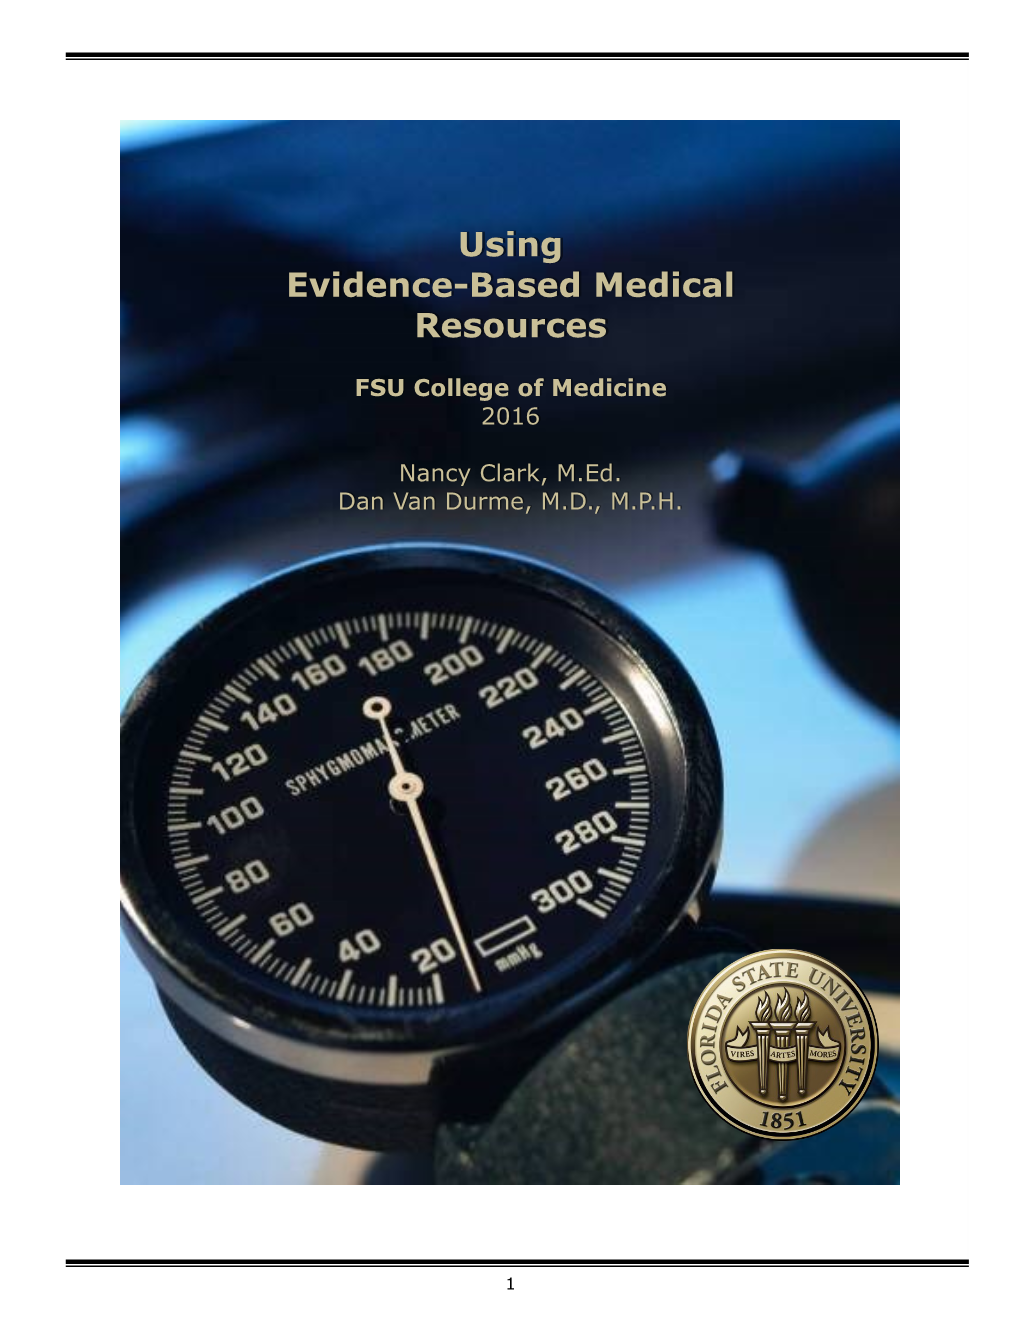 Using Evidence-Based Medical Resources